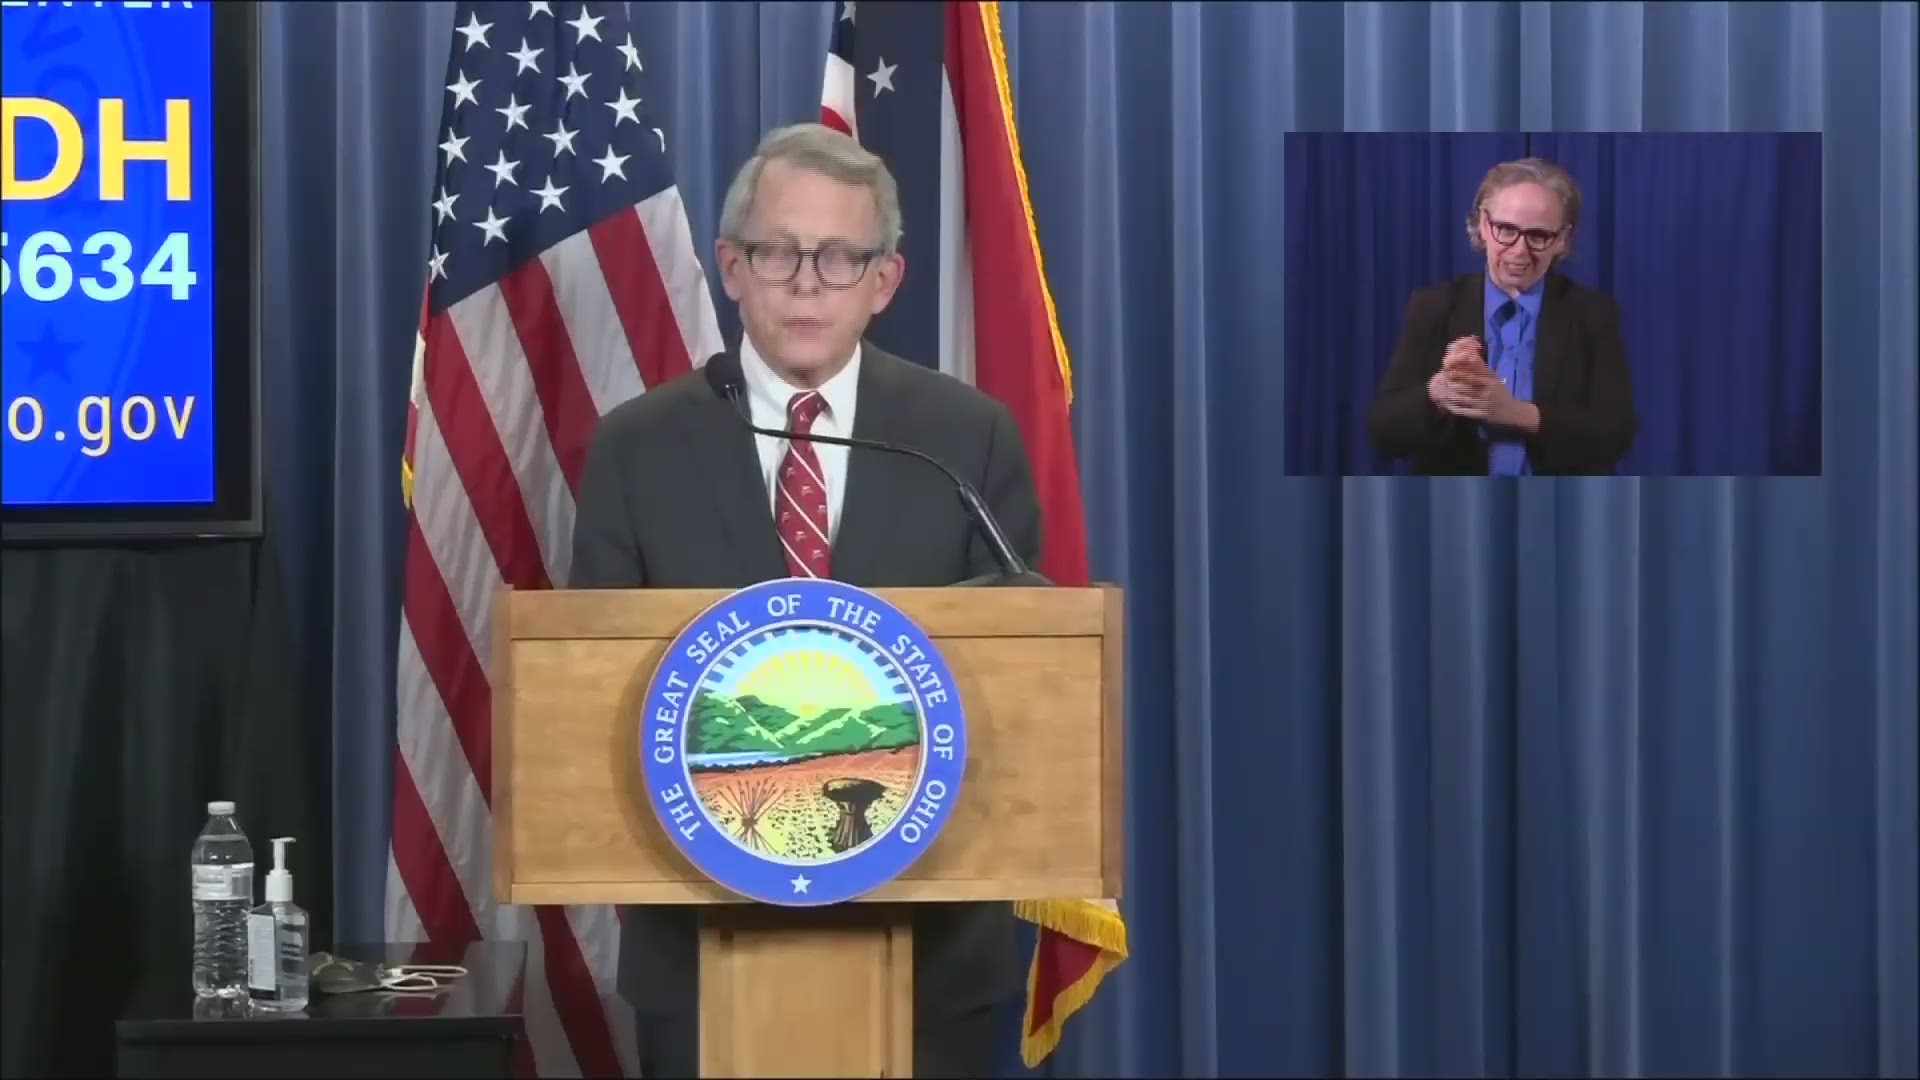 DeWine says K-12 will start in the fall.  The date for starting school is solely in the power of the local school boards and that will continue to be the case.